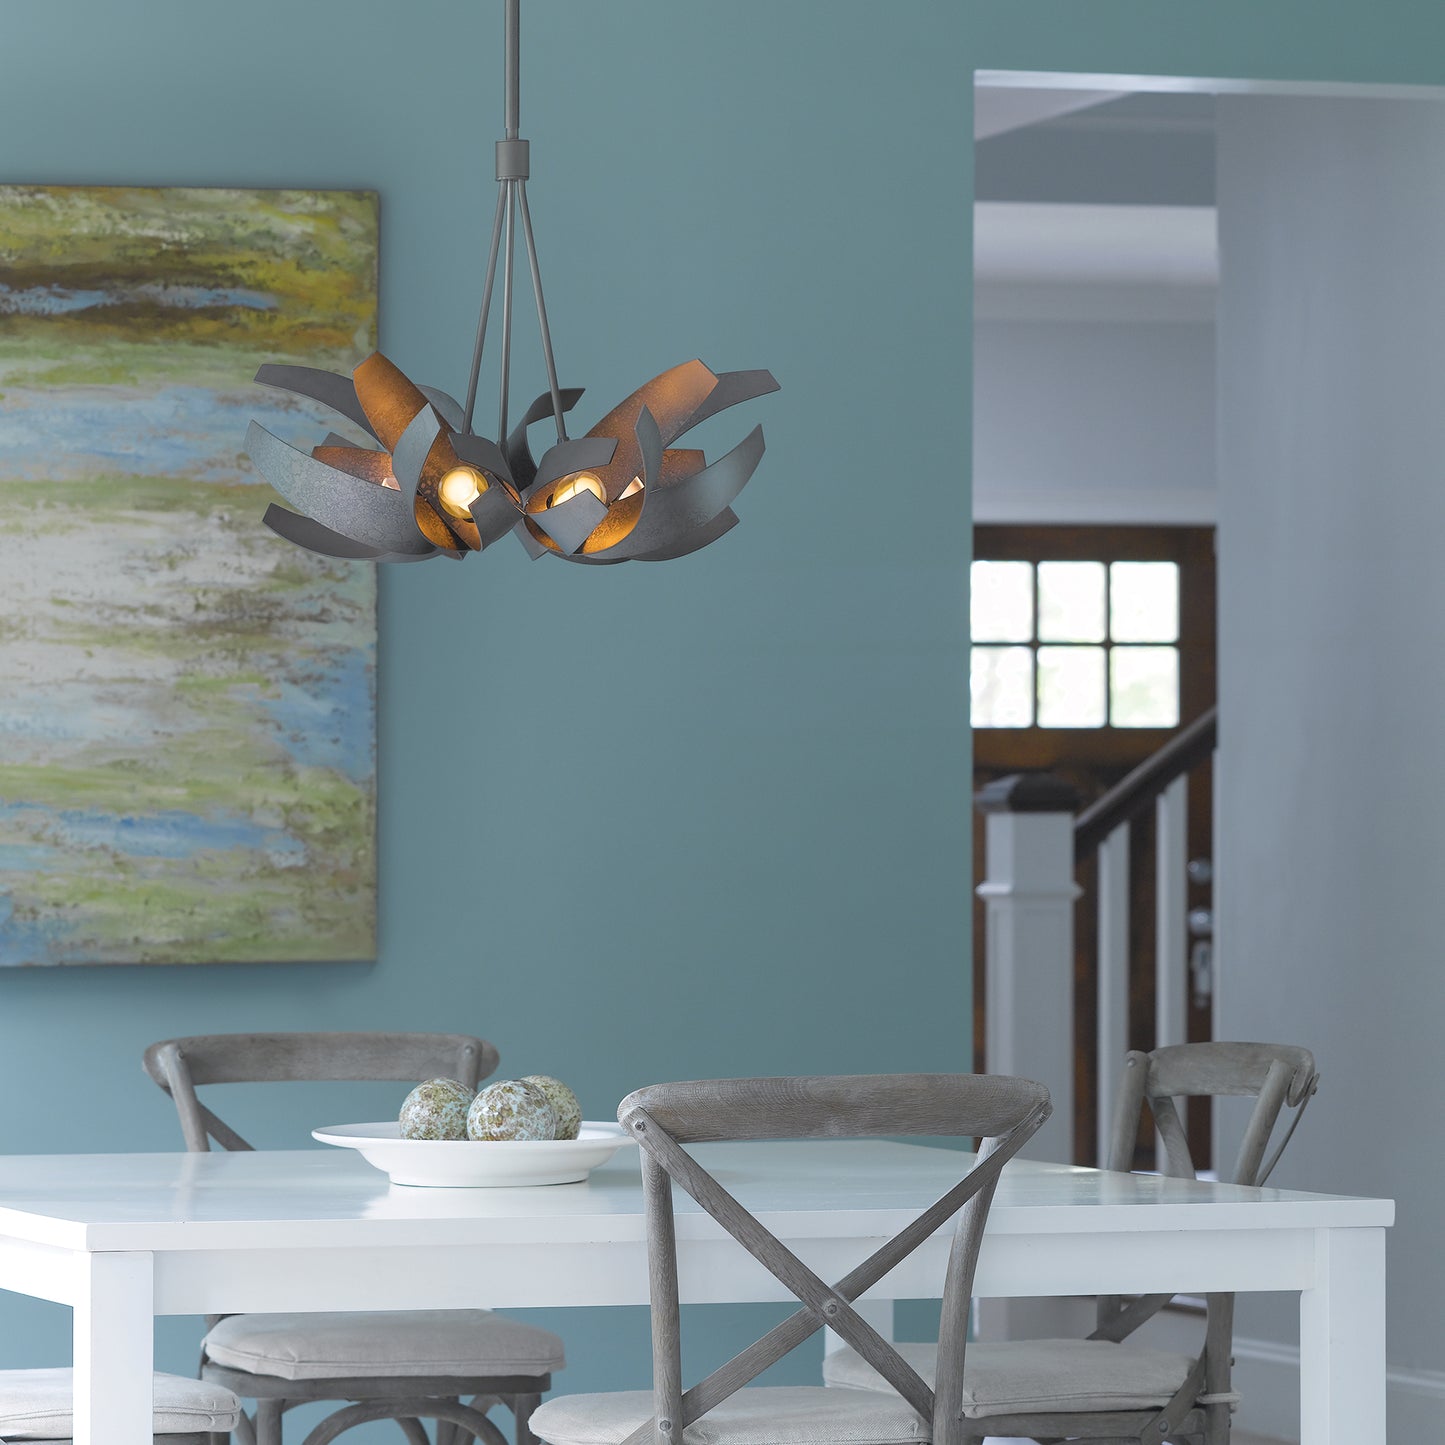 A dining room with blue walls and a white table and chairs featuring a designer pendant, the Hubbardton Forge Corona Pendant.